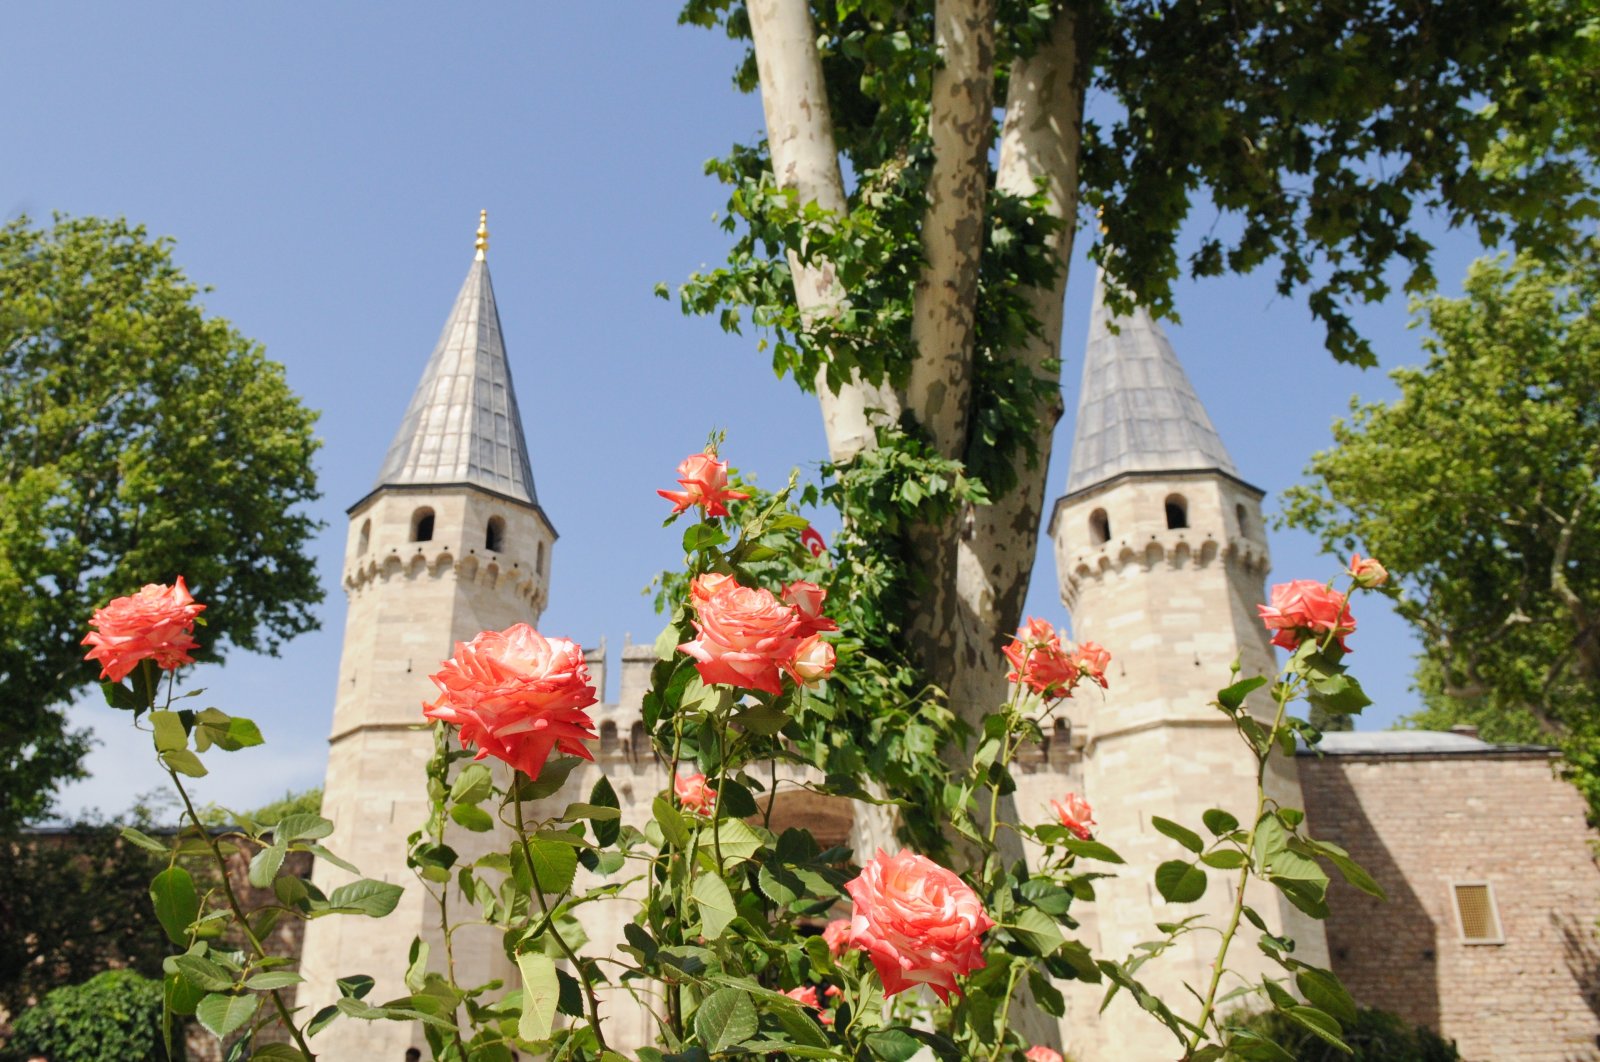 Roses are seen in the garden at the entrance of Topkapı Palace in Istanbul, Turkey. (Photo by Shutterstock)